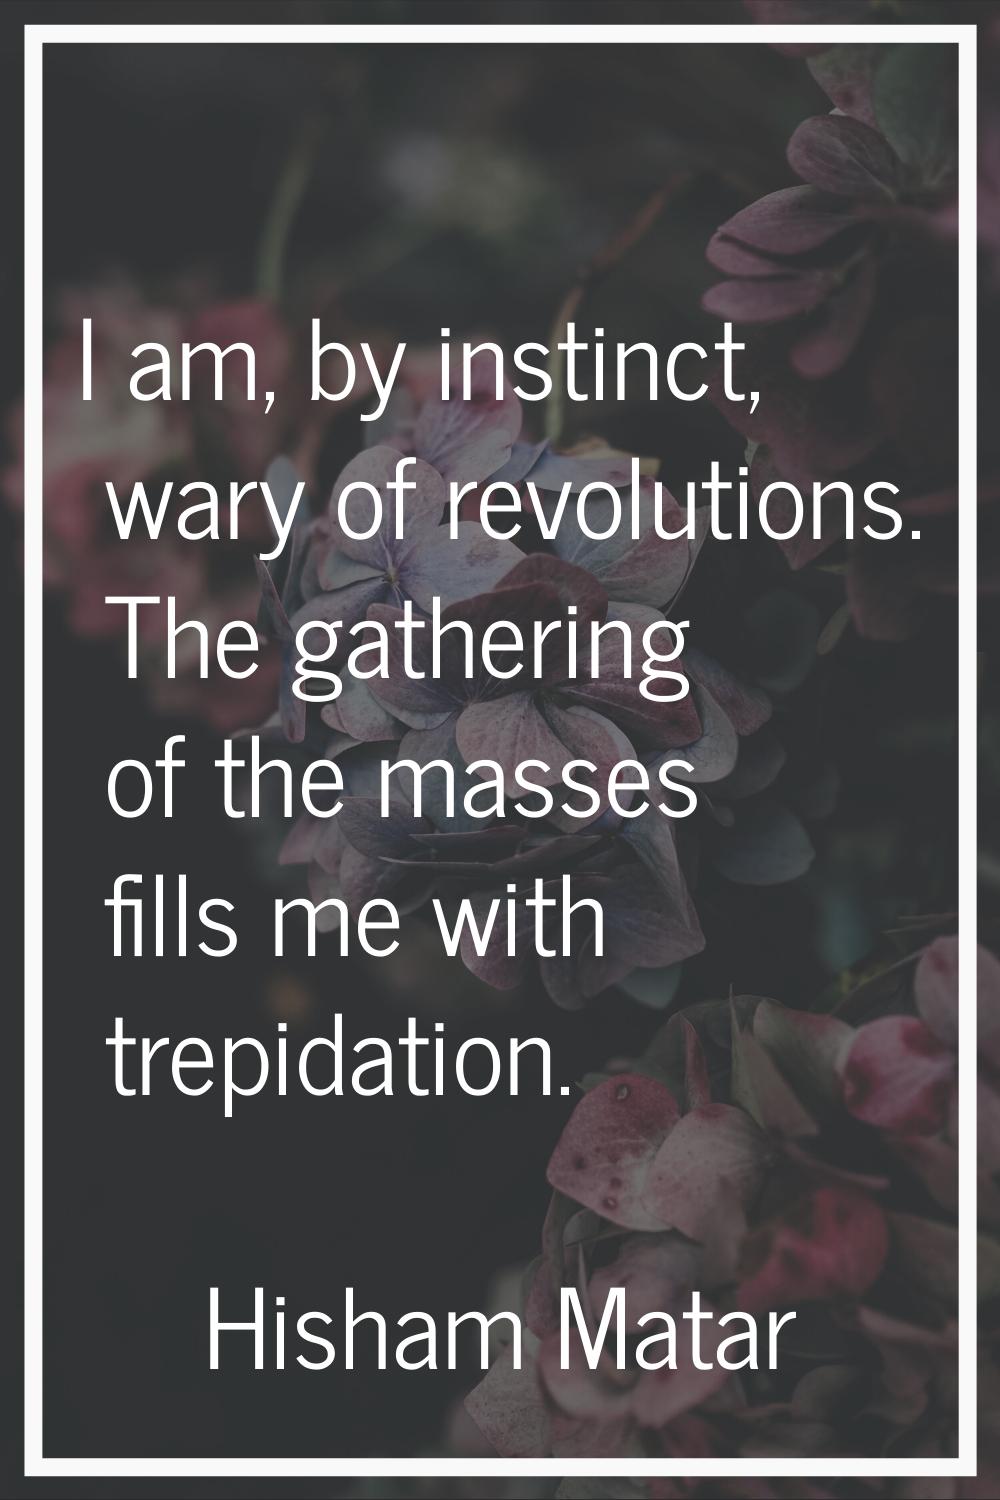 I am, by instinct, wary of revolutions. The gathering of the masses fills me with trepidation.